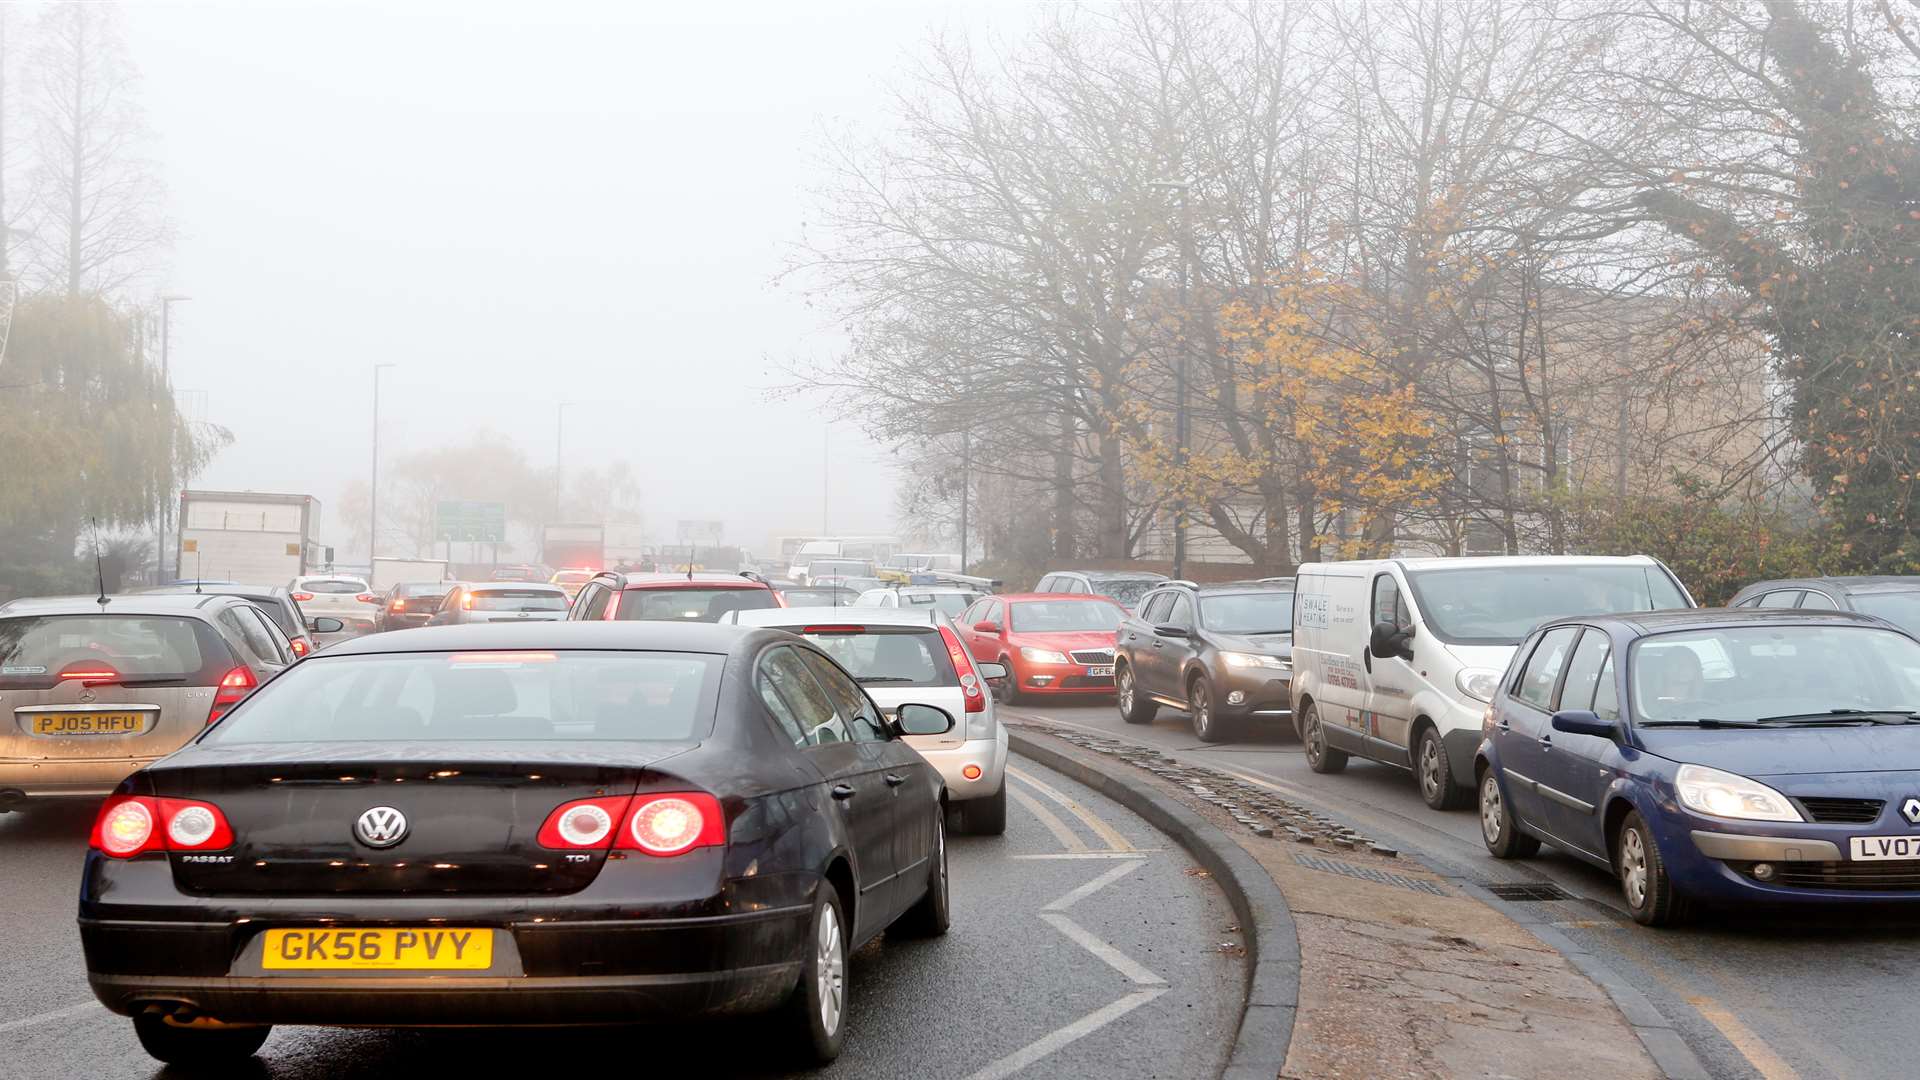 Traffic in Maidstone is at a standstill